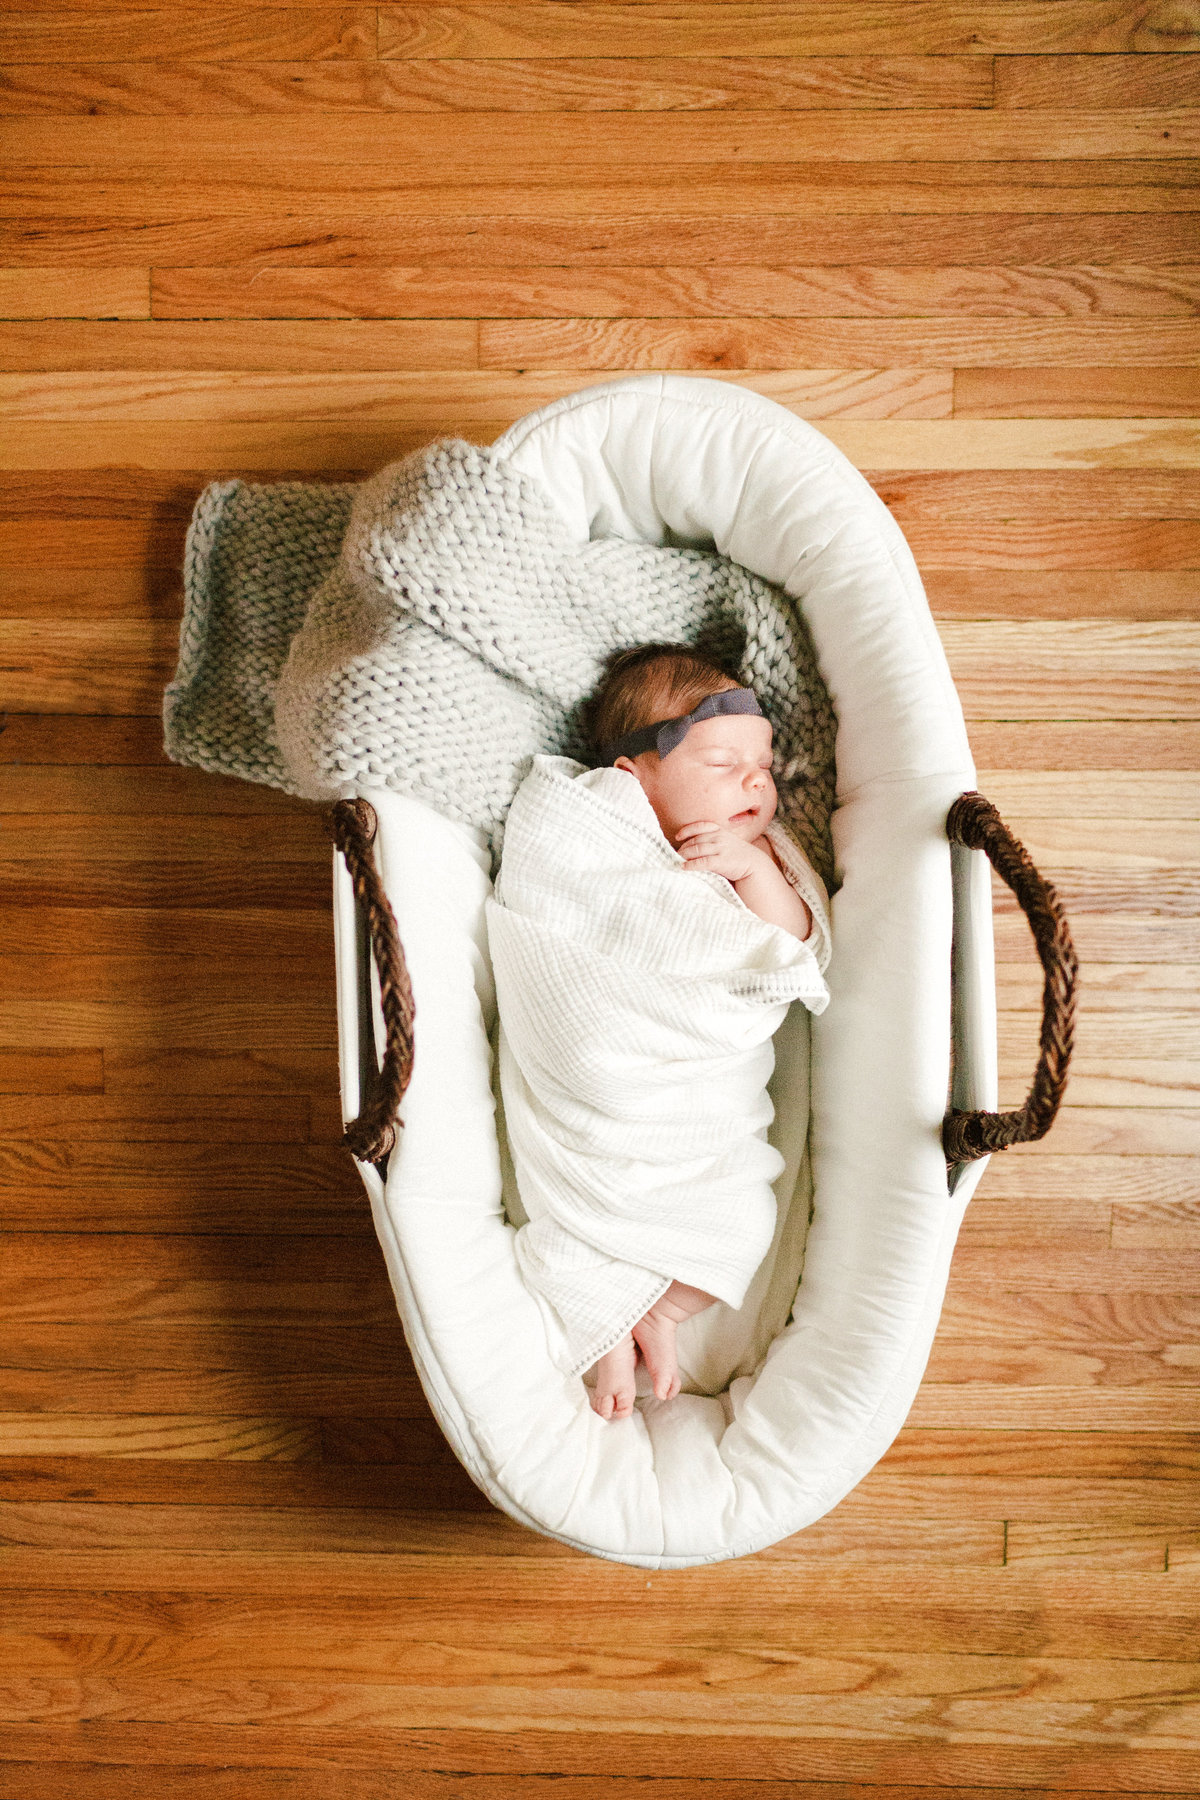 sleeping baby girl in a basket on wood floors for lifestyle newborn photography twin cities minnesota